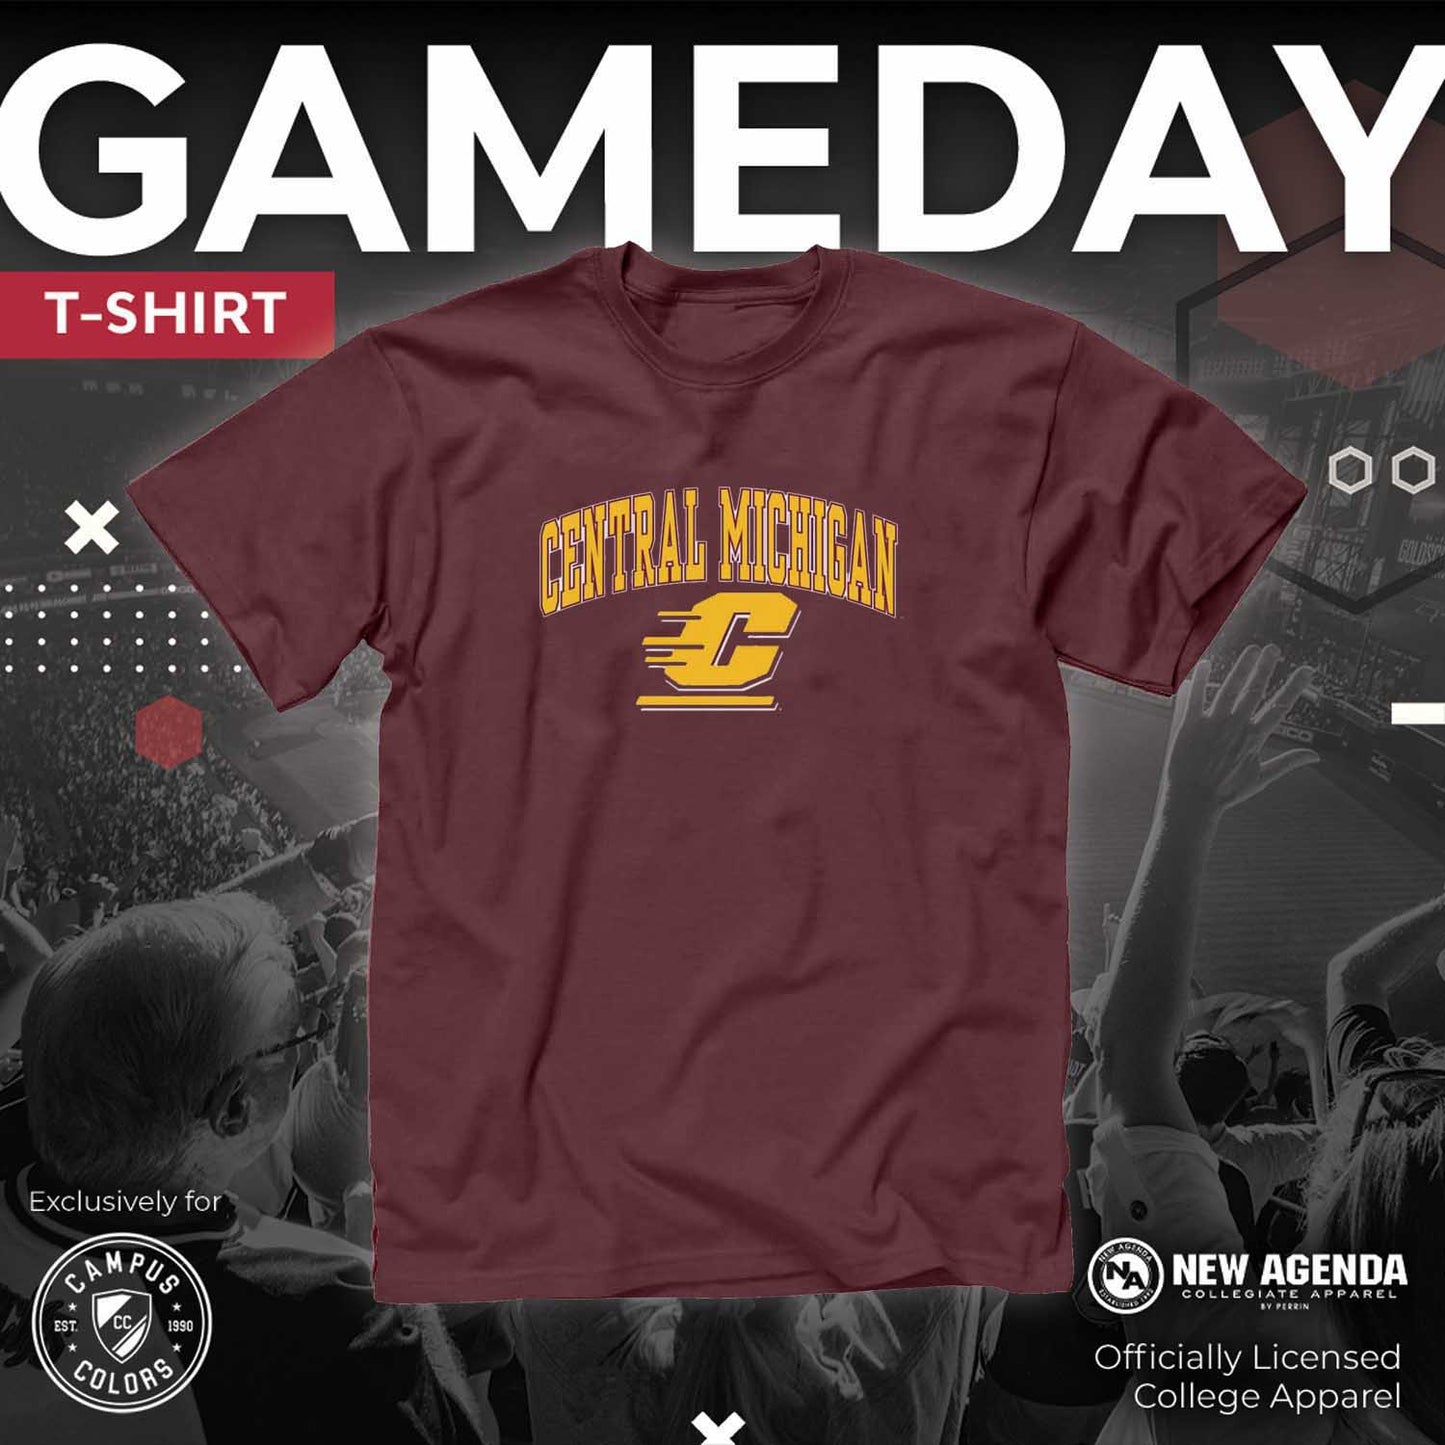 Central Michigan Chippewas NCAA Adult Gameday Cotton T-Shirt - Maroon